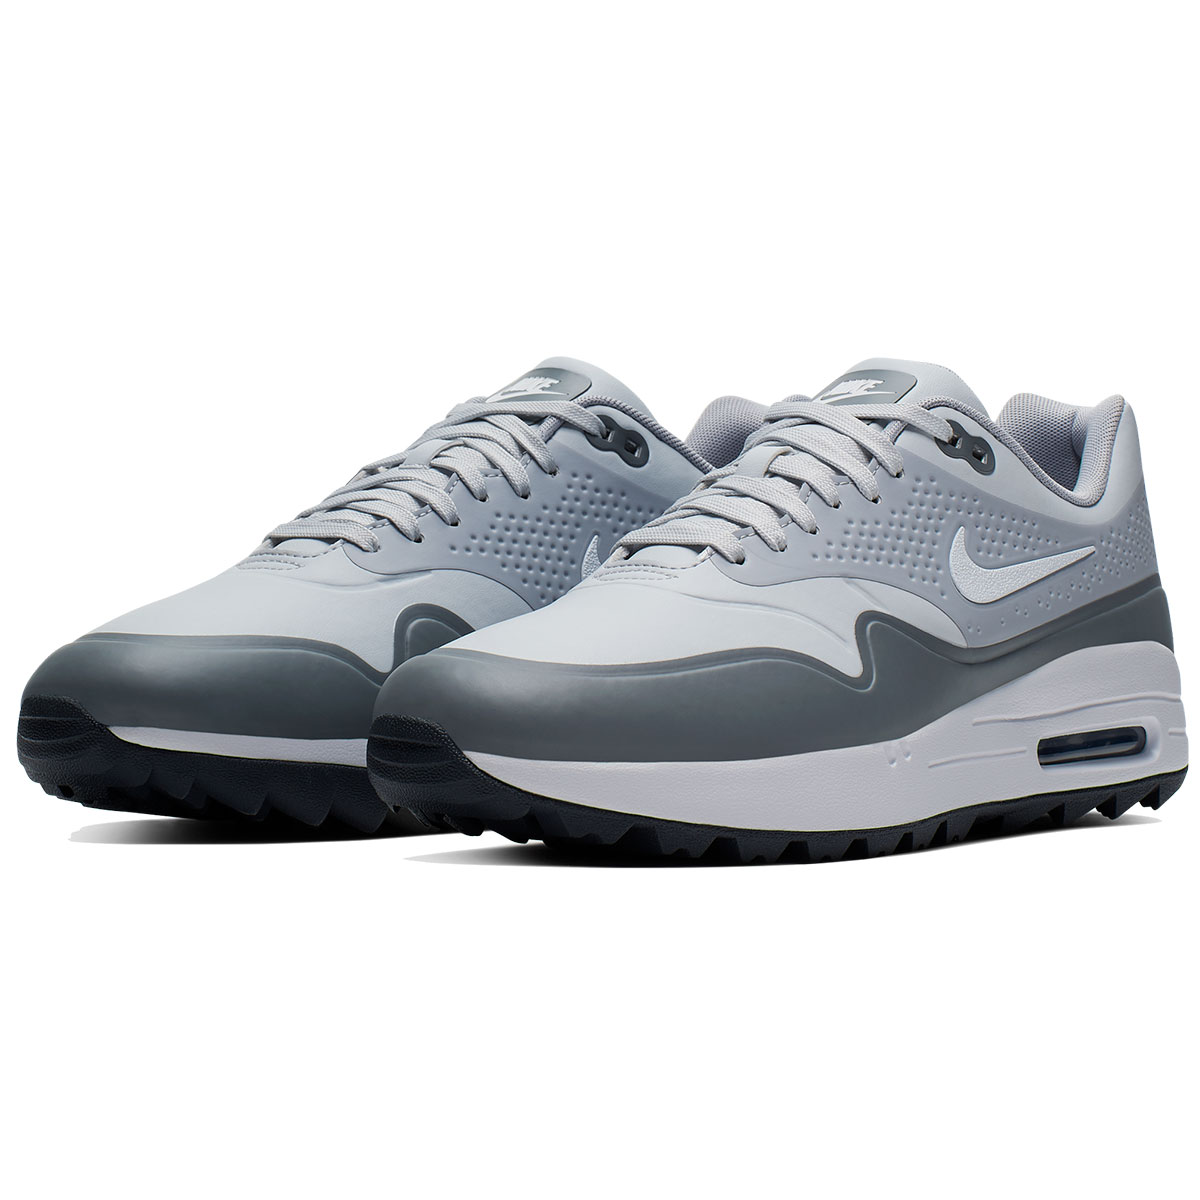 Nike Air Max 1G Shoes from american golf